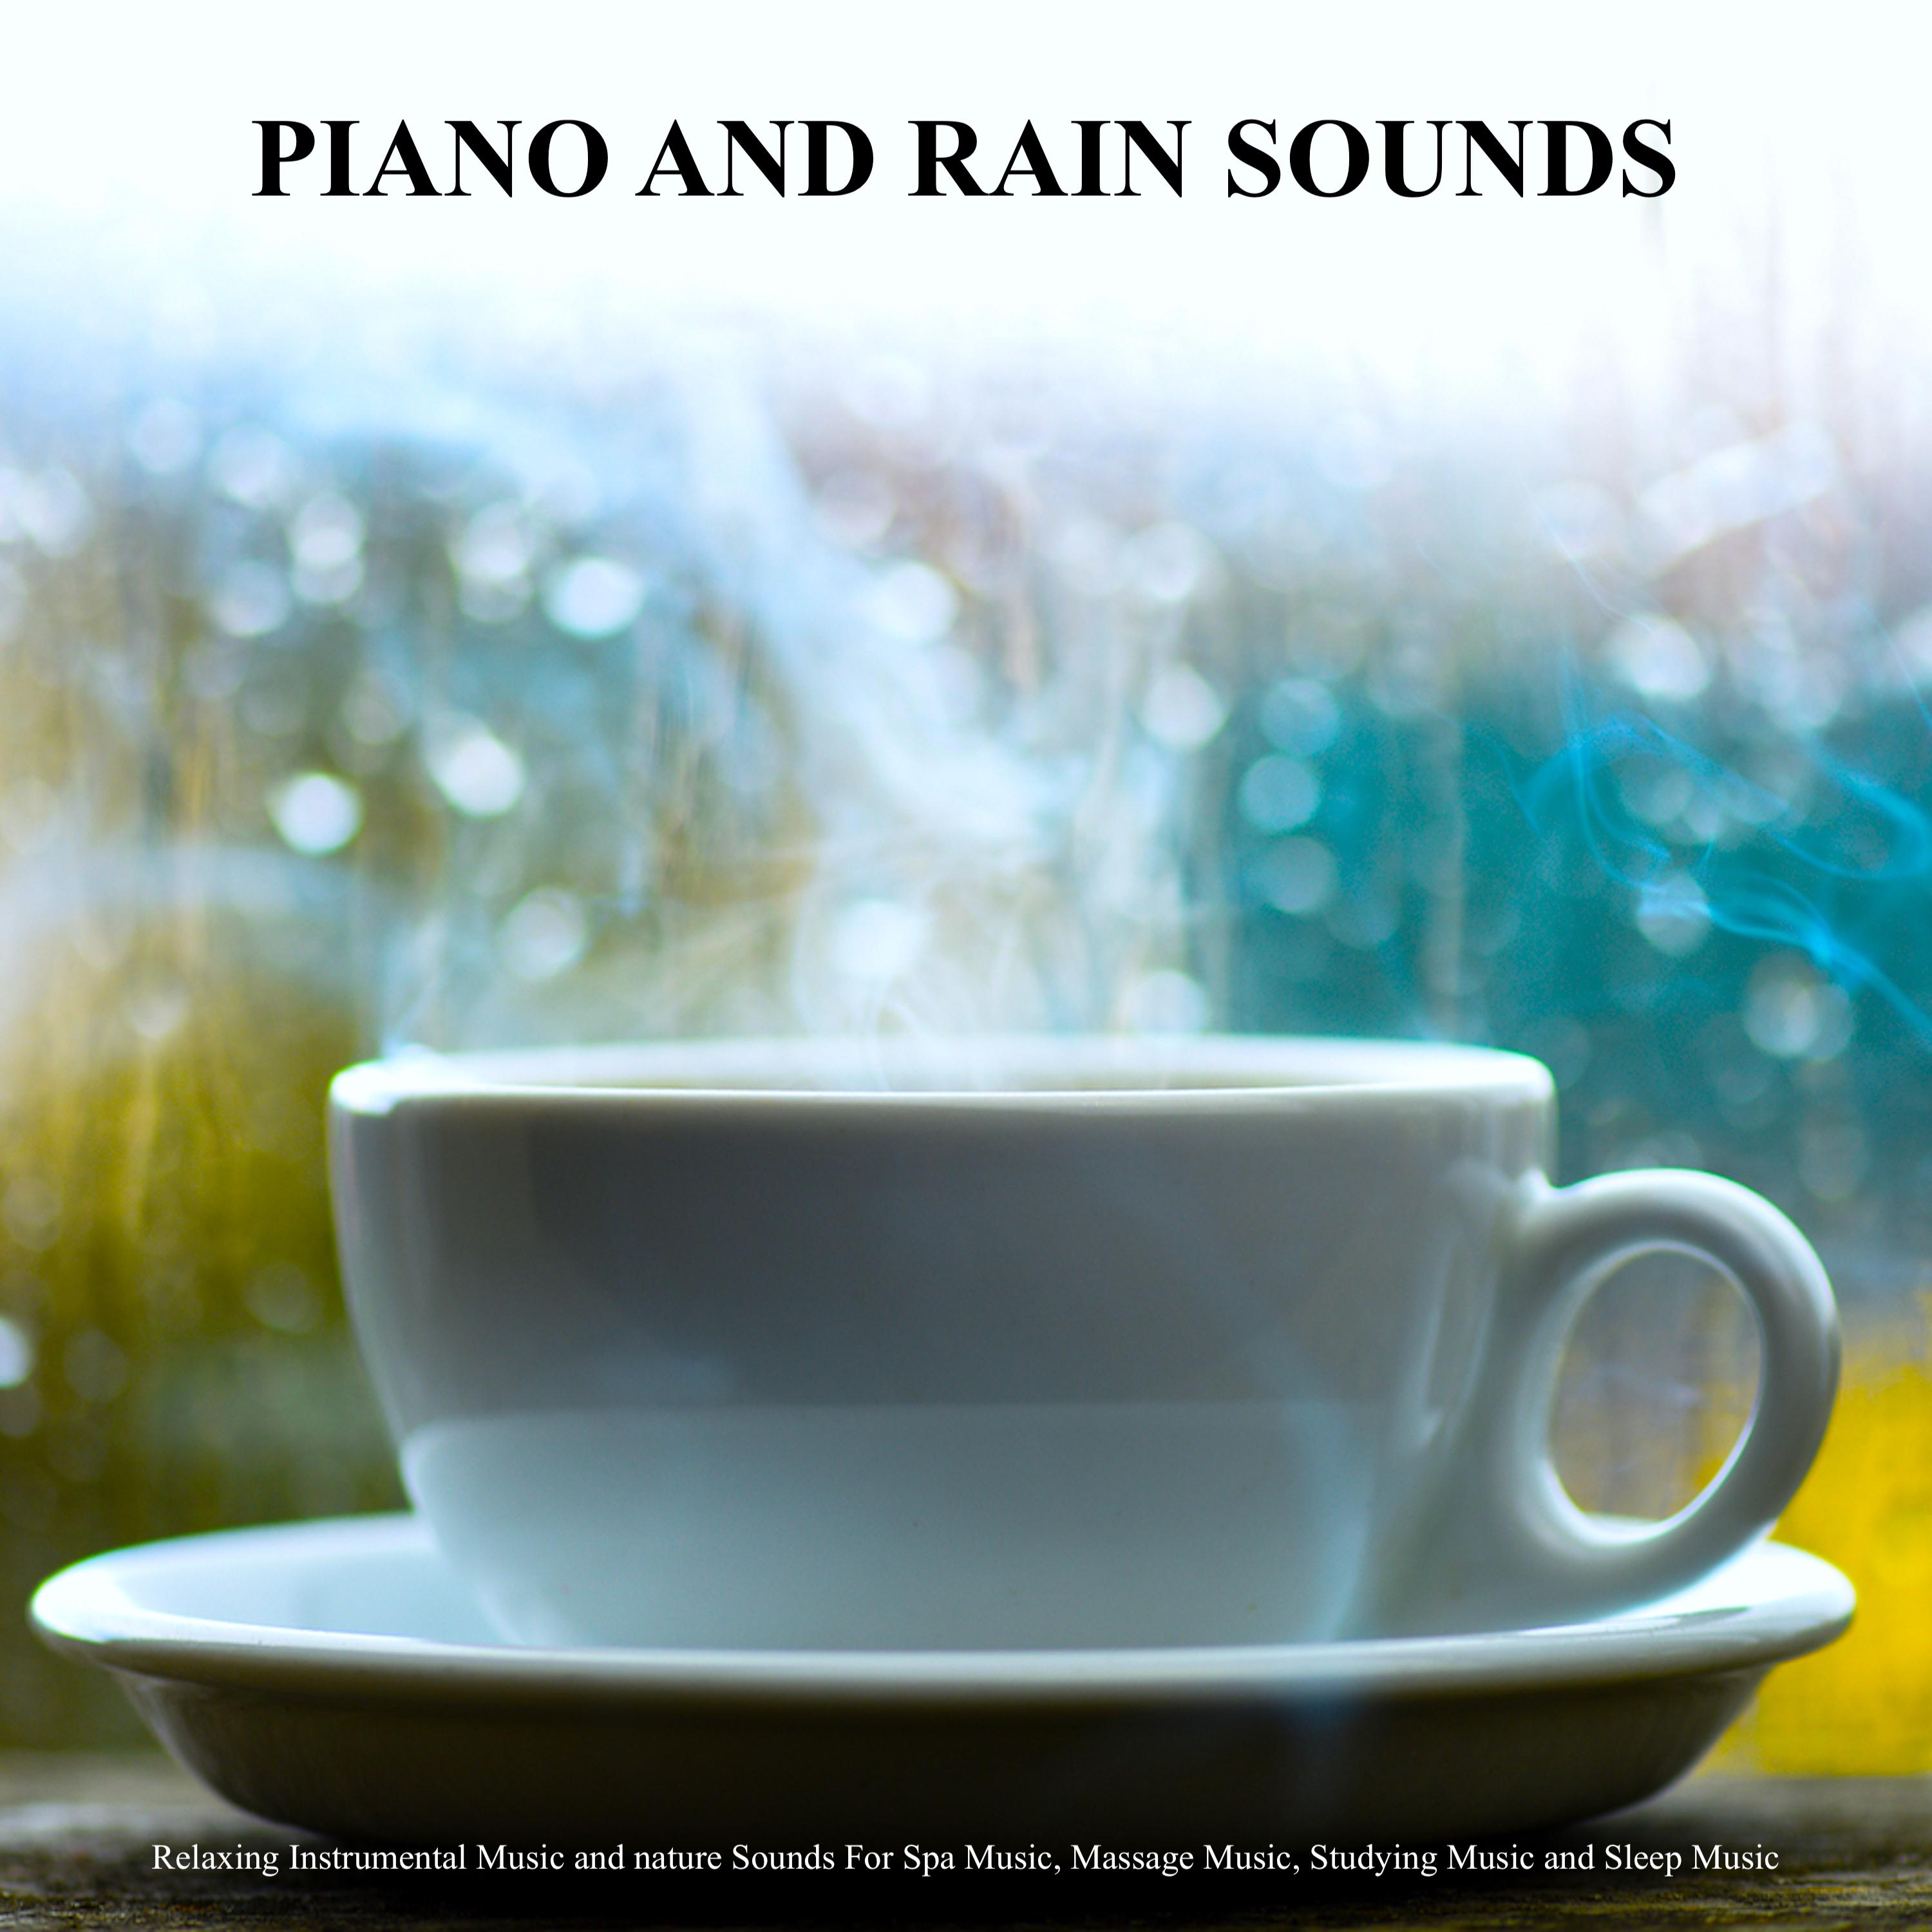 Soft Piano and Rain Therapy Music